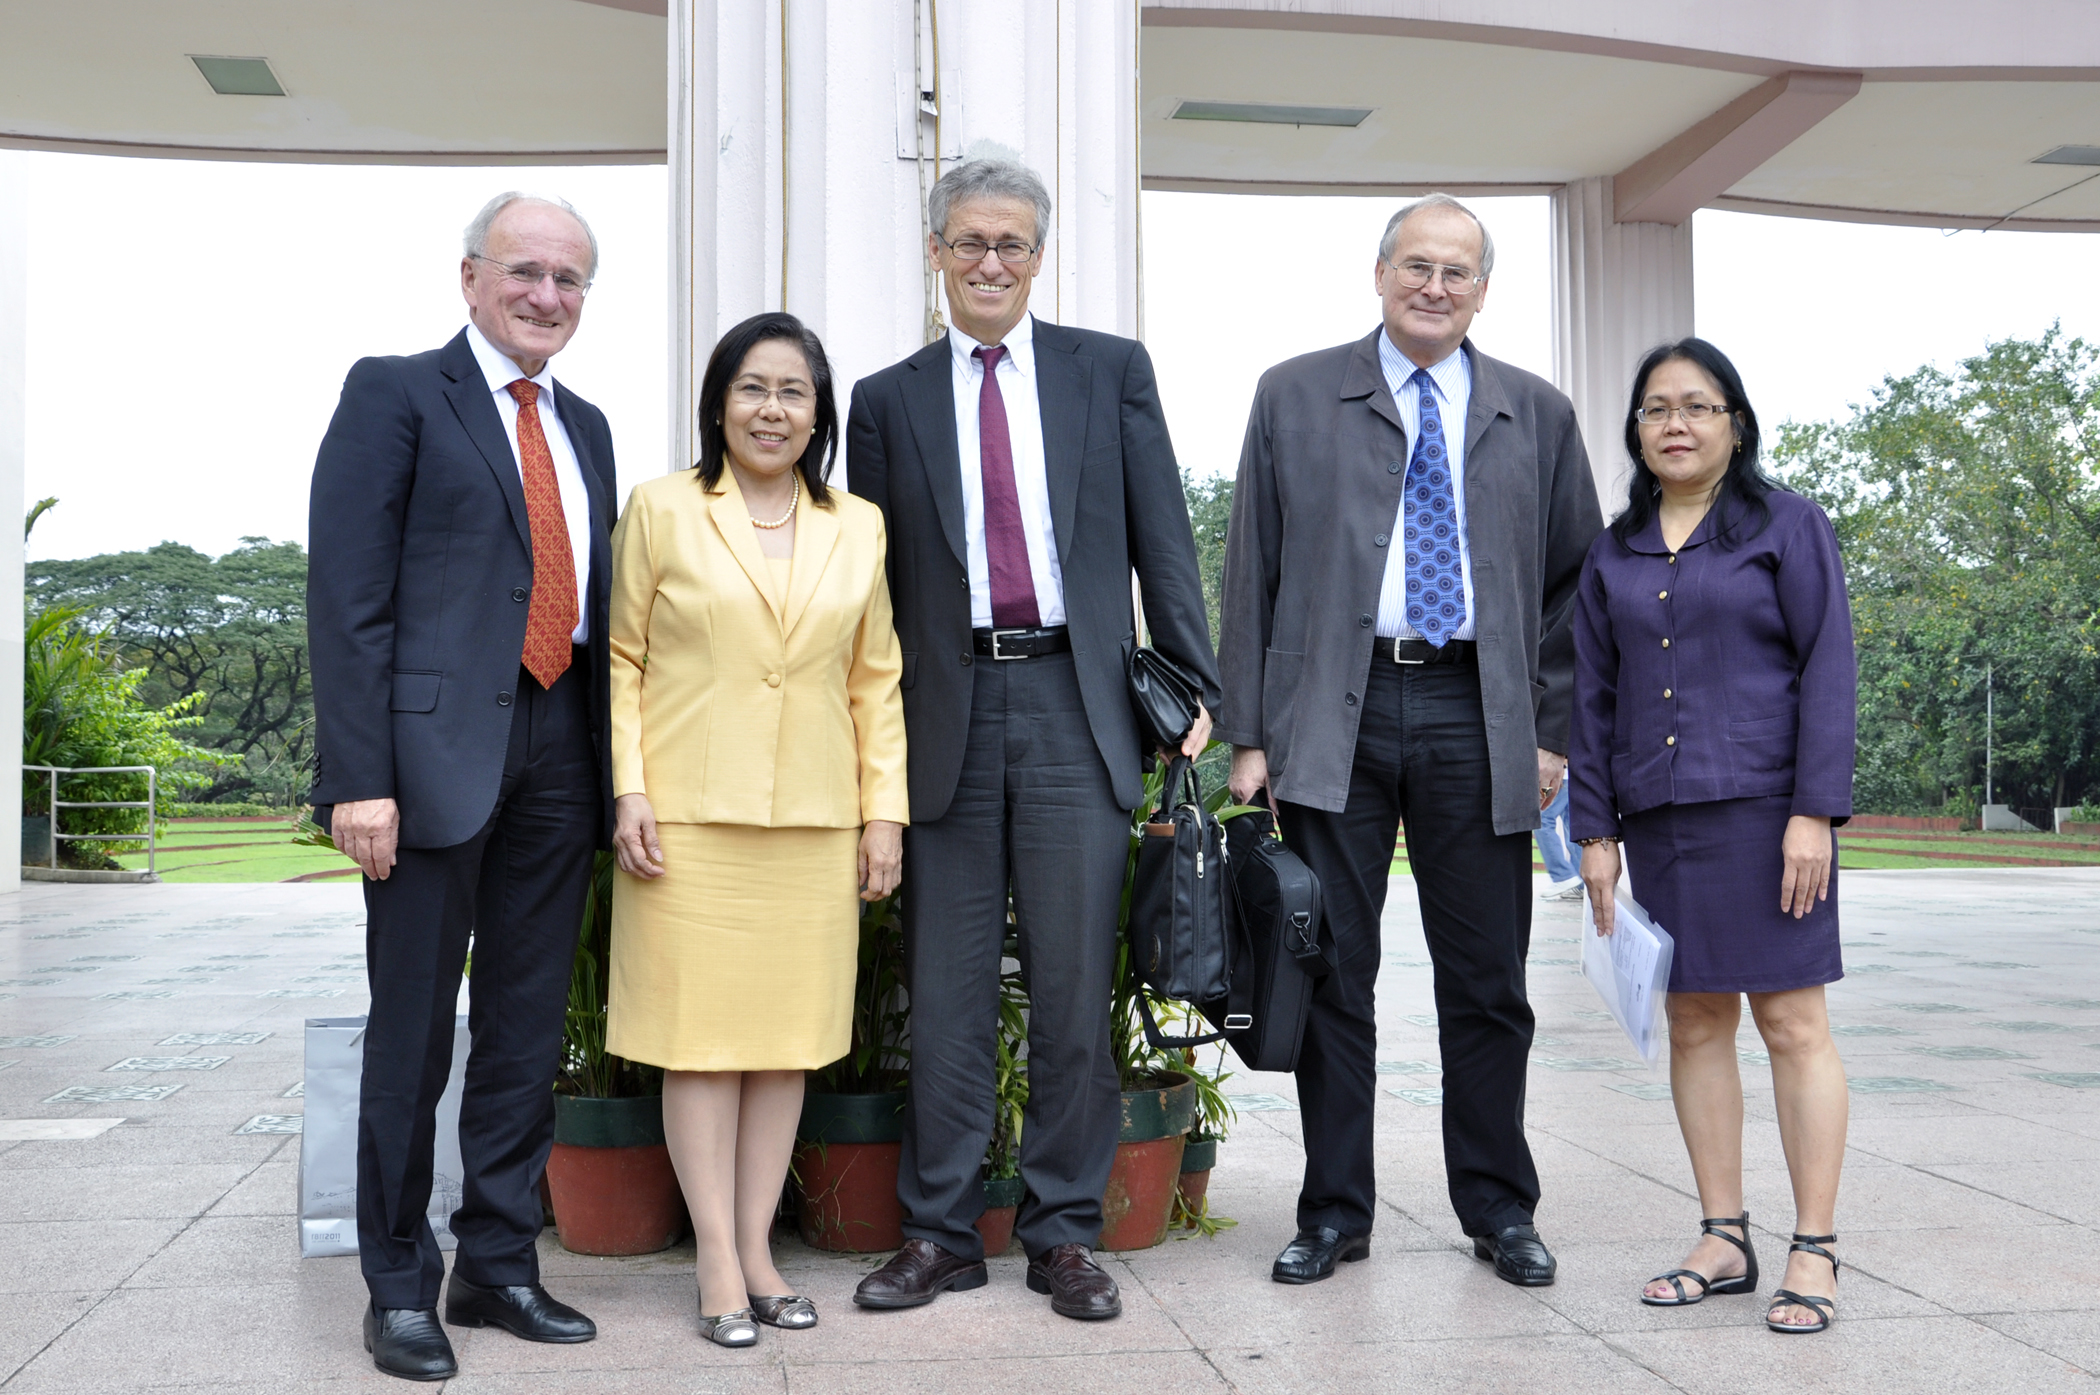 Prof. Kappel (second from right) with representatives of the University of the Philippines and representatives of ASEA-UNINET Austria, 2010 © Prof. Hartmut Kahlert, Graz University of Technology